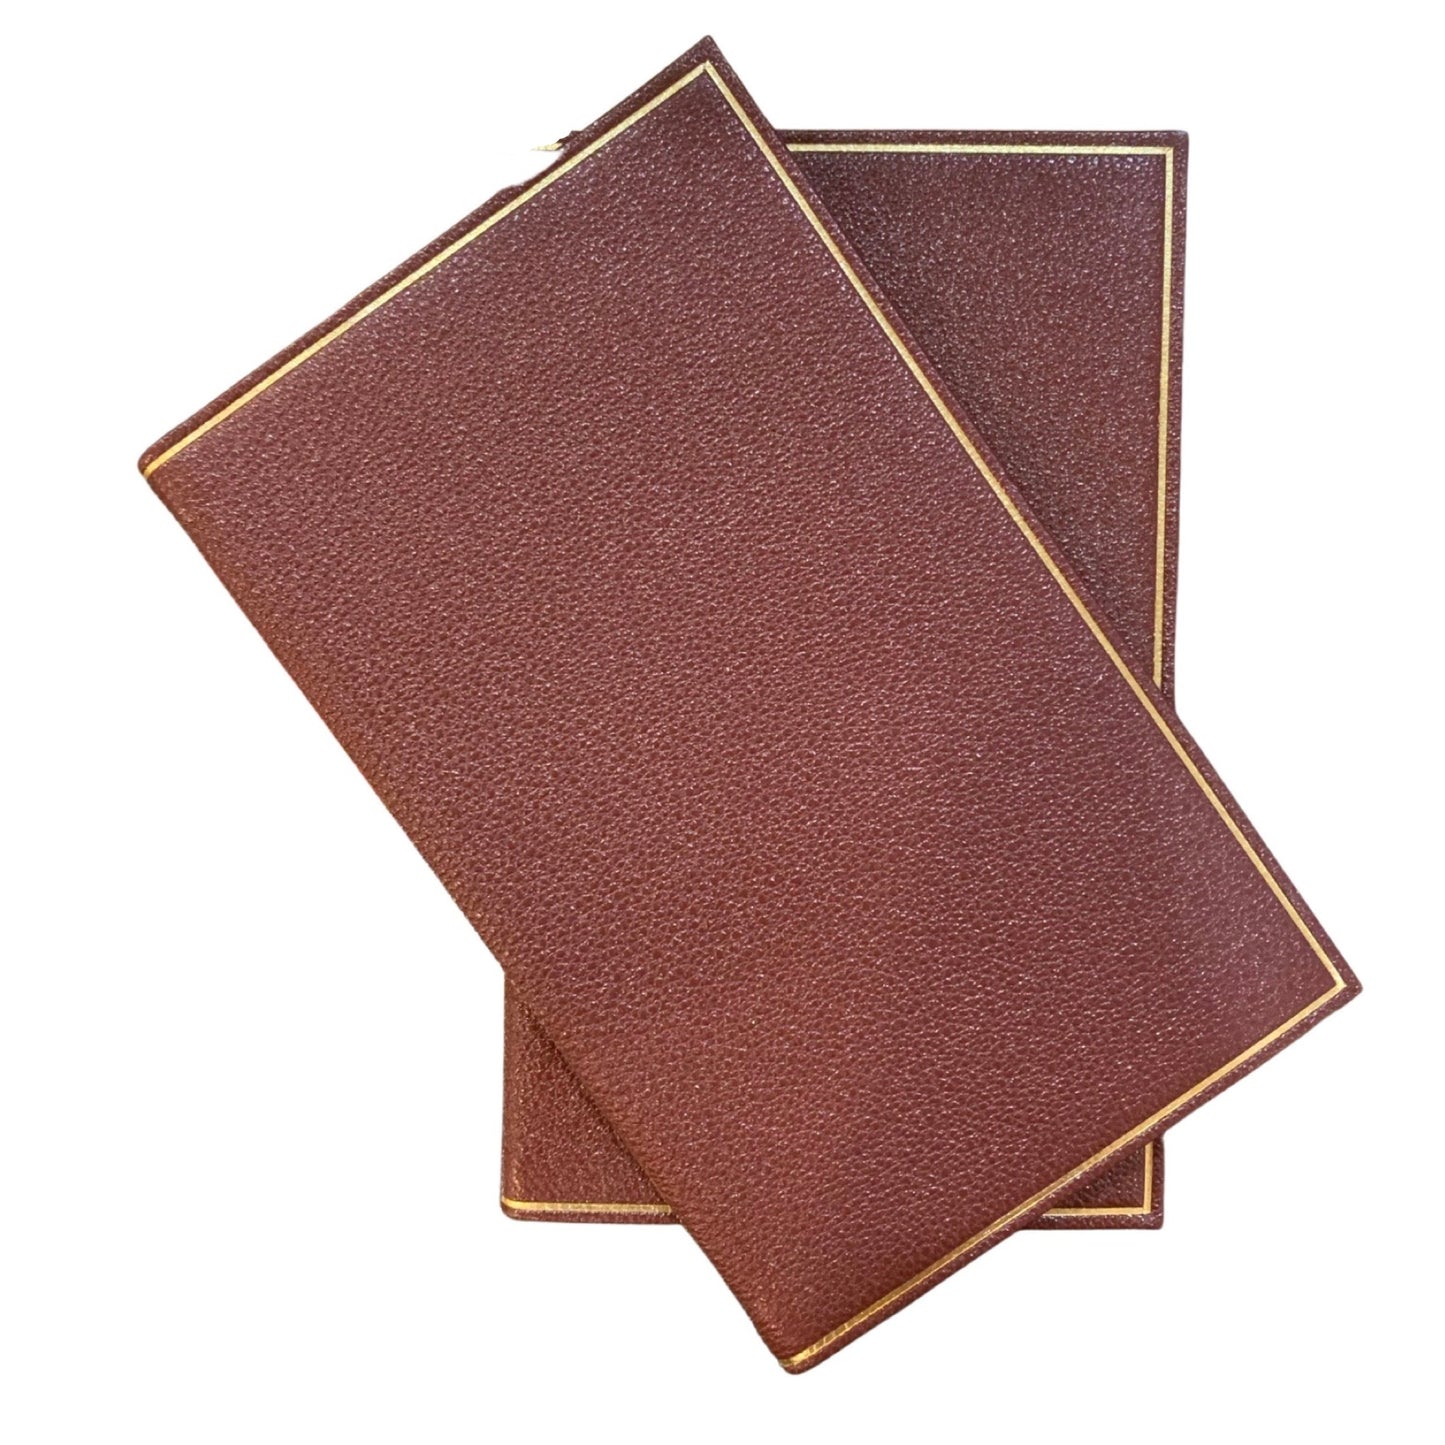 Address Book | 5 by 3 inches | Morocco Leather | Charing Cross Leather | A53M